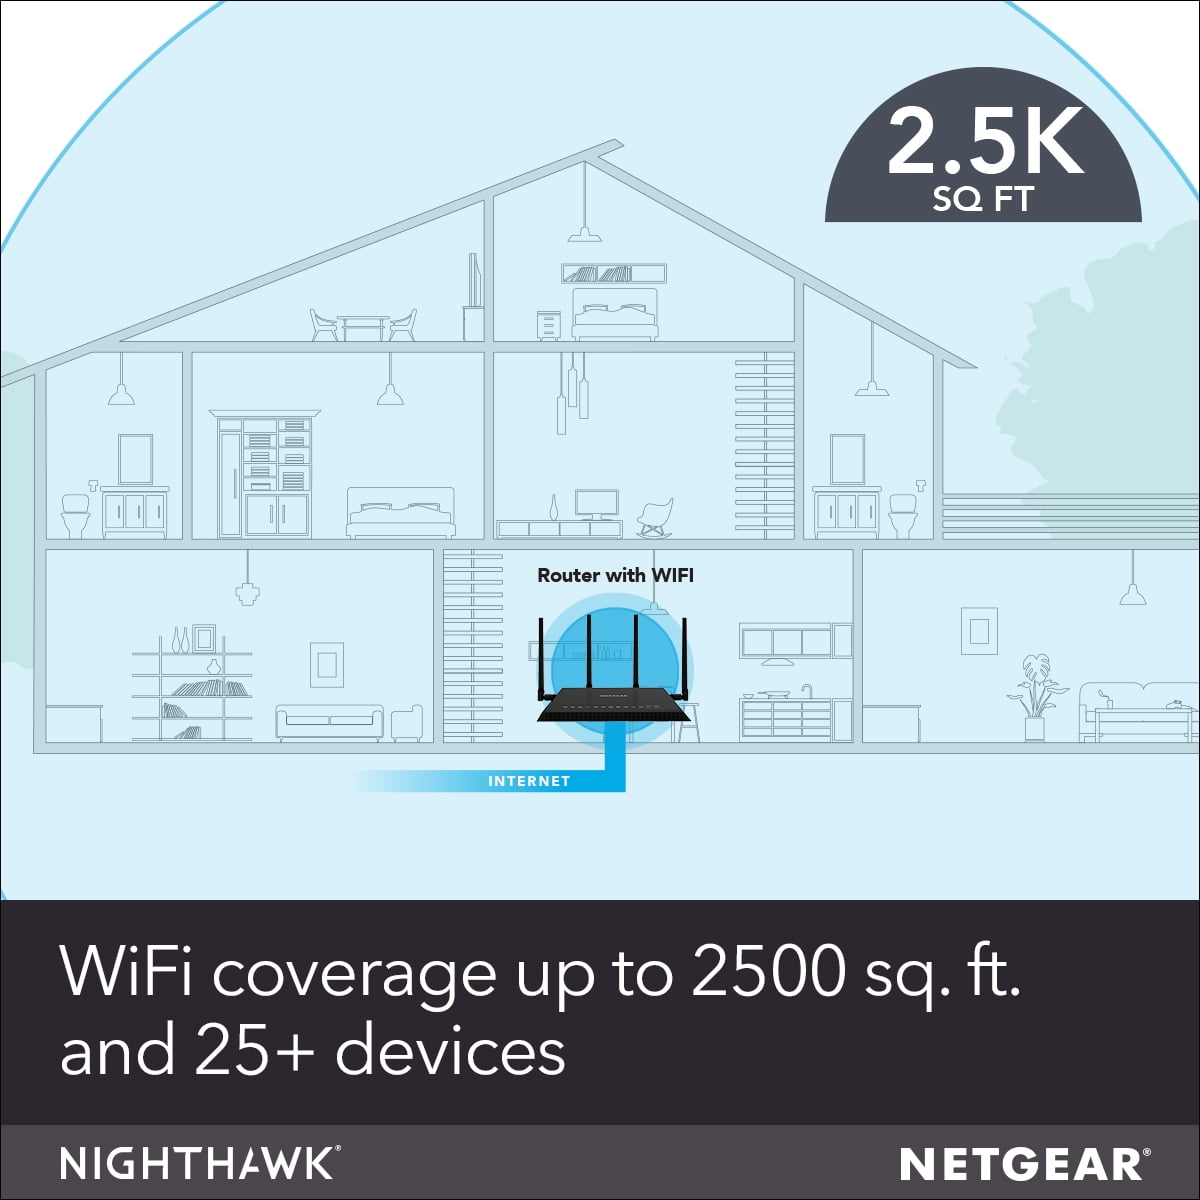 R7350 NETGEAR Nighthawk Smart WiFi Router AC2400 Up to 2500 Sq Ft Coverage 4 GIGABIT Ports 3.0 USB and Extreme WiFi Speed for Gaming and 4K UHD Video Streaming—Up to 2400Mbps 